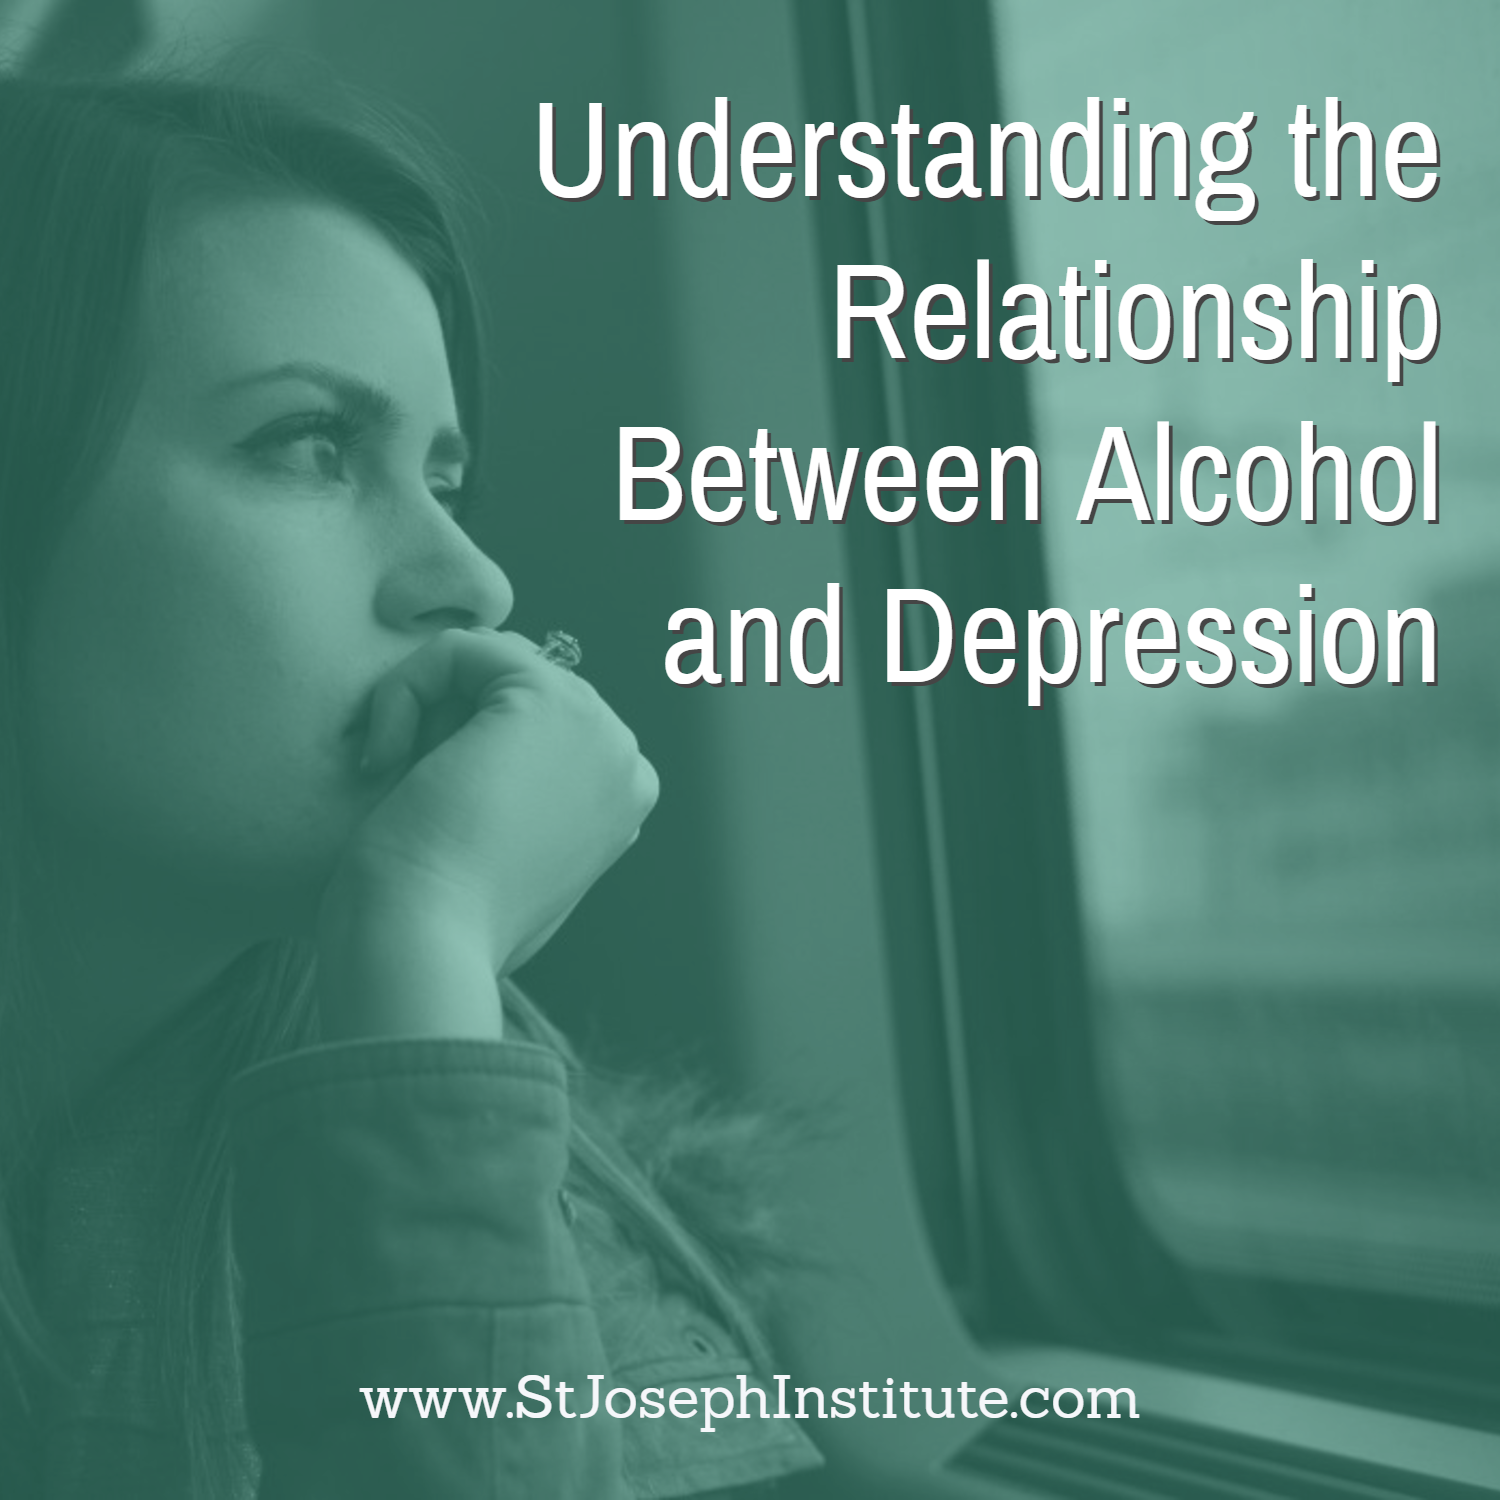 sad woman looking out train window - Understanding the relationship between alcohol and depression